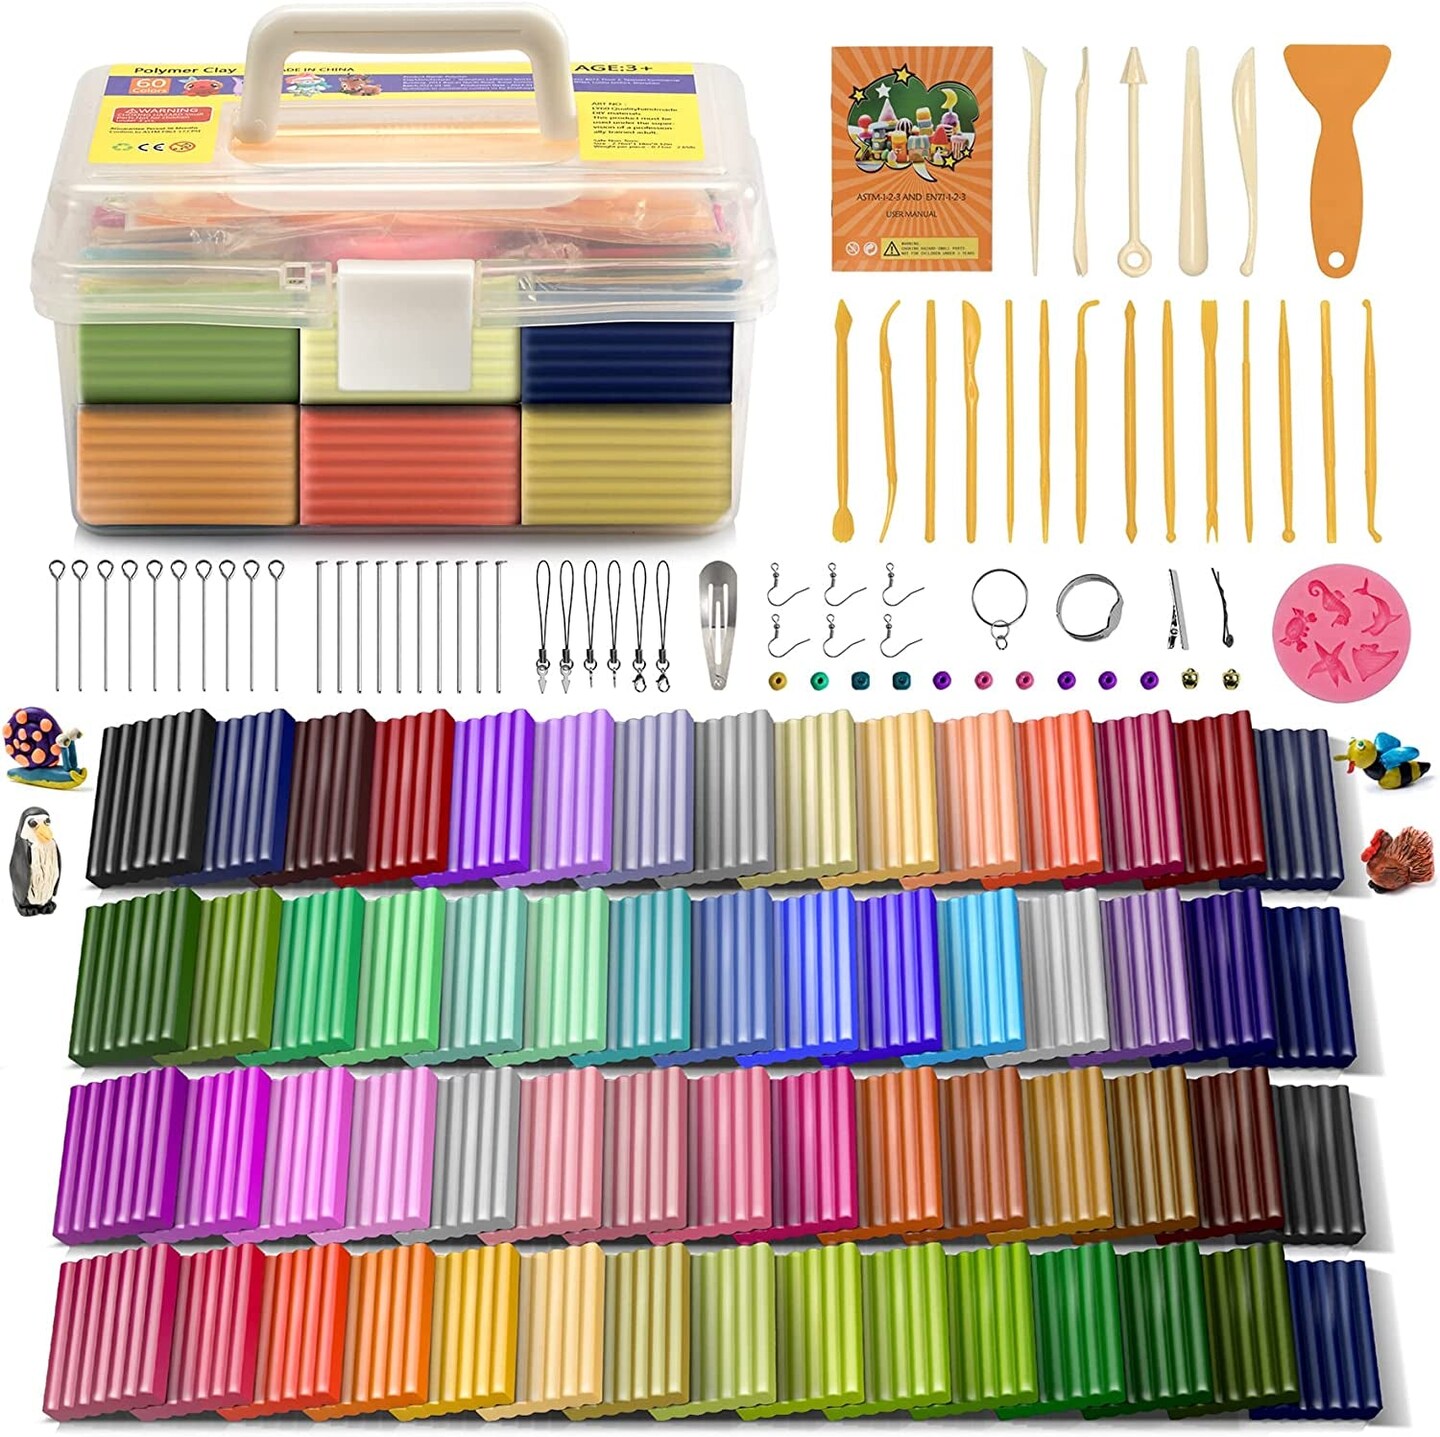 Polymer Clay Kit with Sculpting Tools, 50 Colors